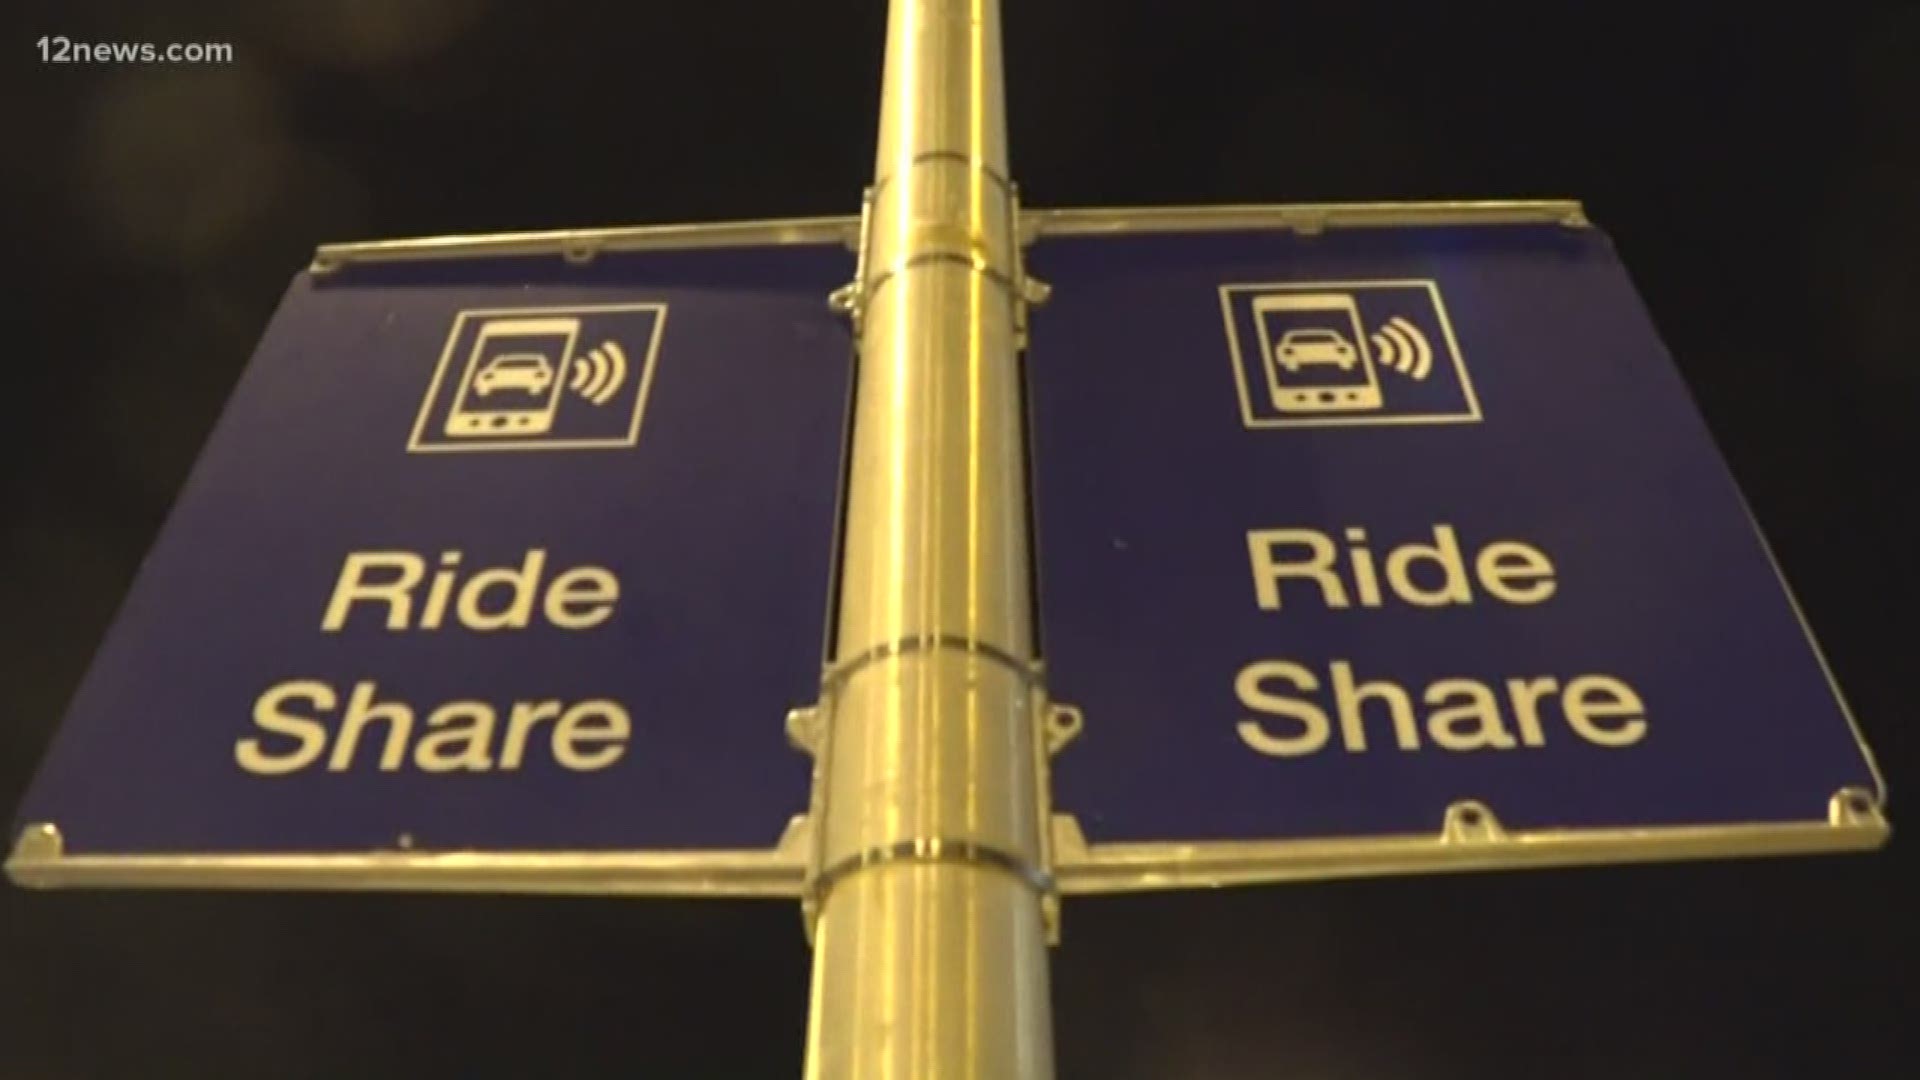 A 7-2 vote by the Phoenix City Council approved increased fees for rideshare companies at Sky Harbor Airport. Fees would increase from $2.66 to $4.